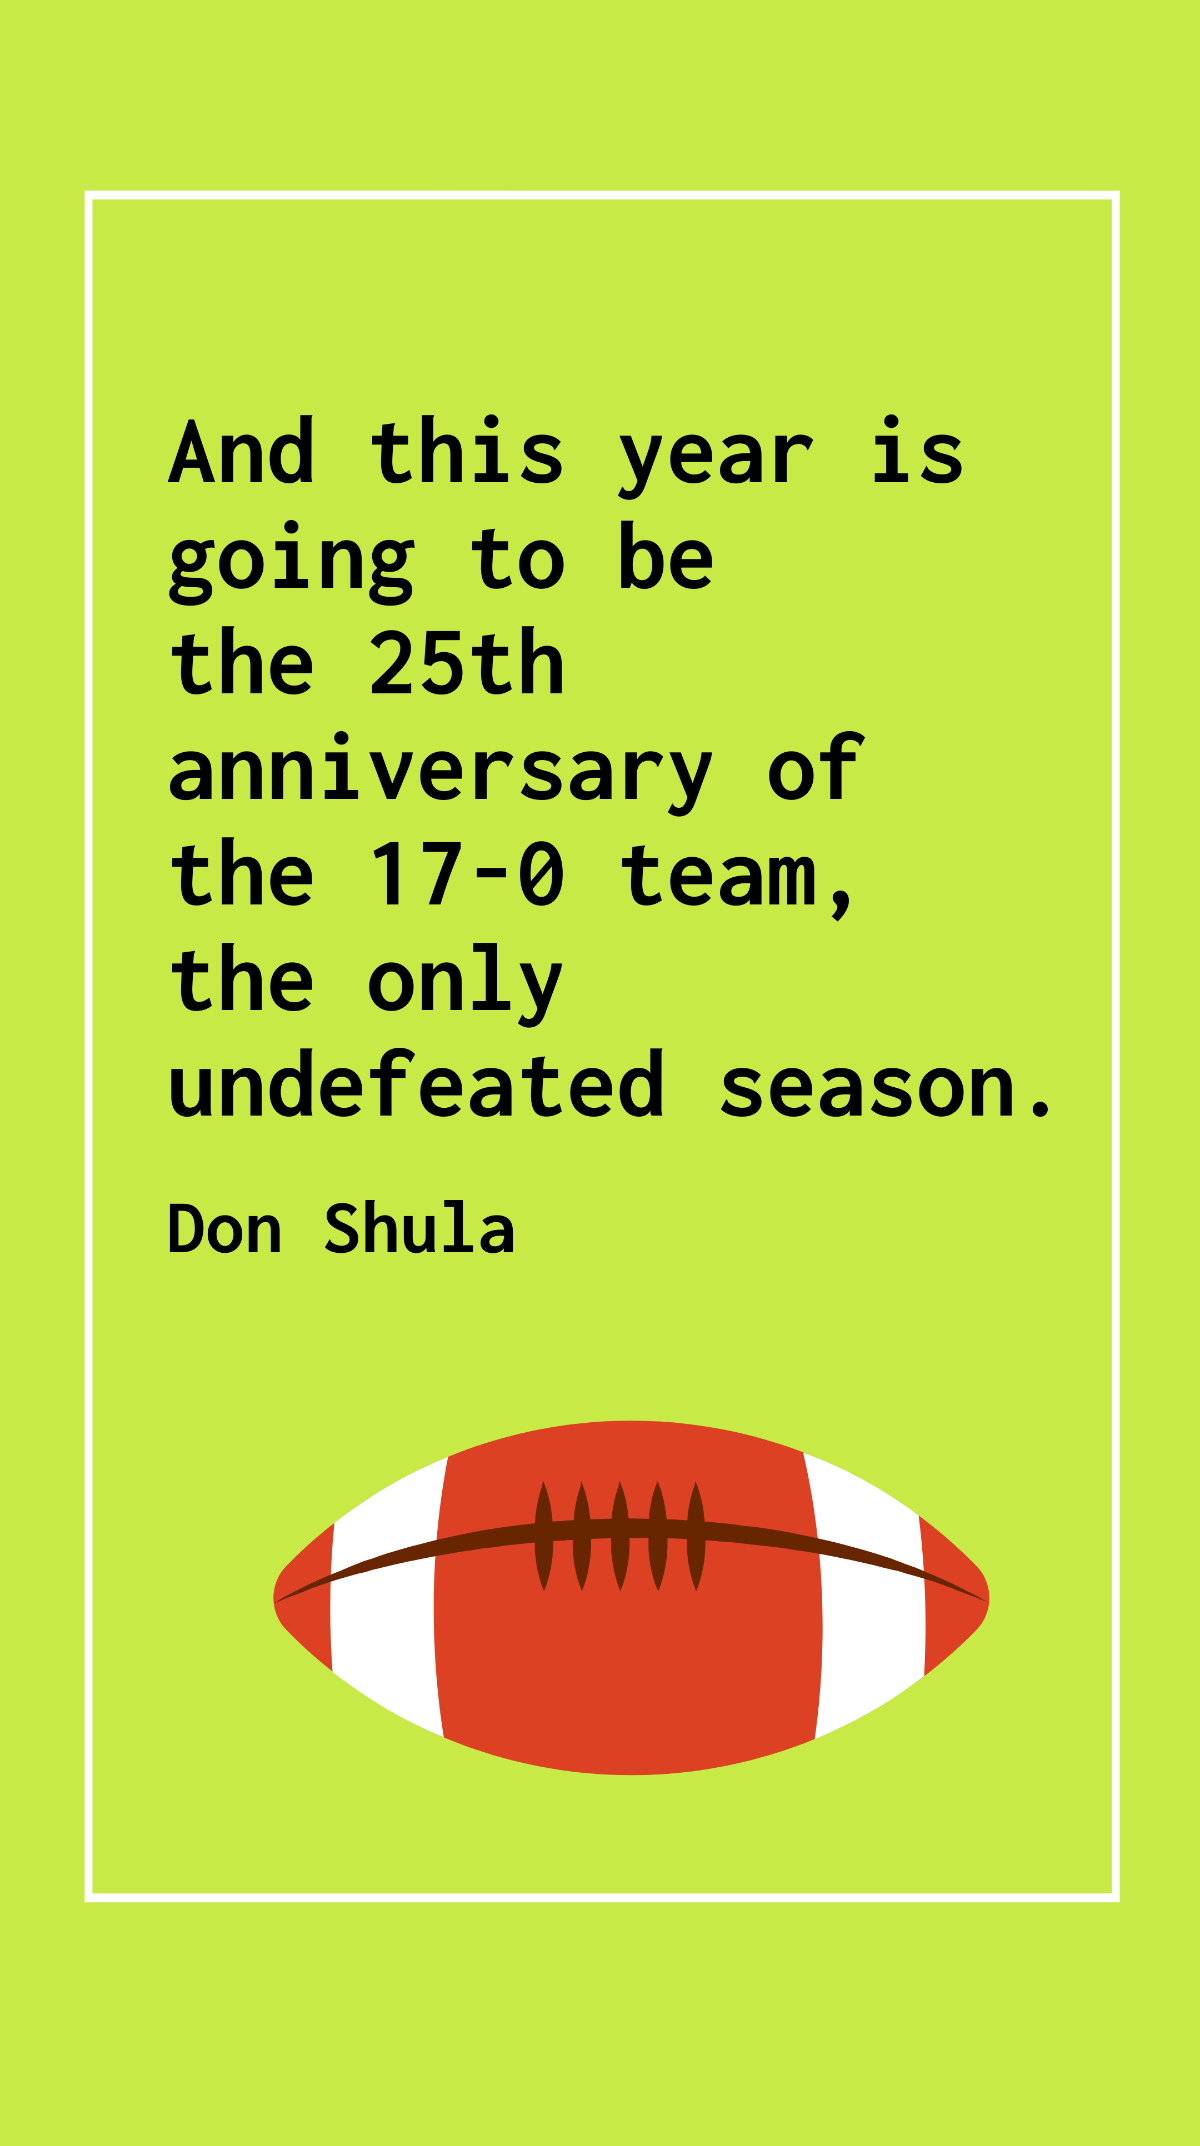 Free Don Shula - And this year is going to be the 25th anniversary of the 17-0 team, the only undefeated season. Template